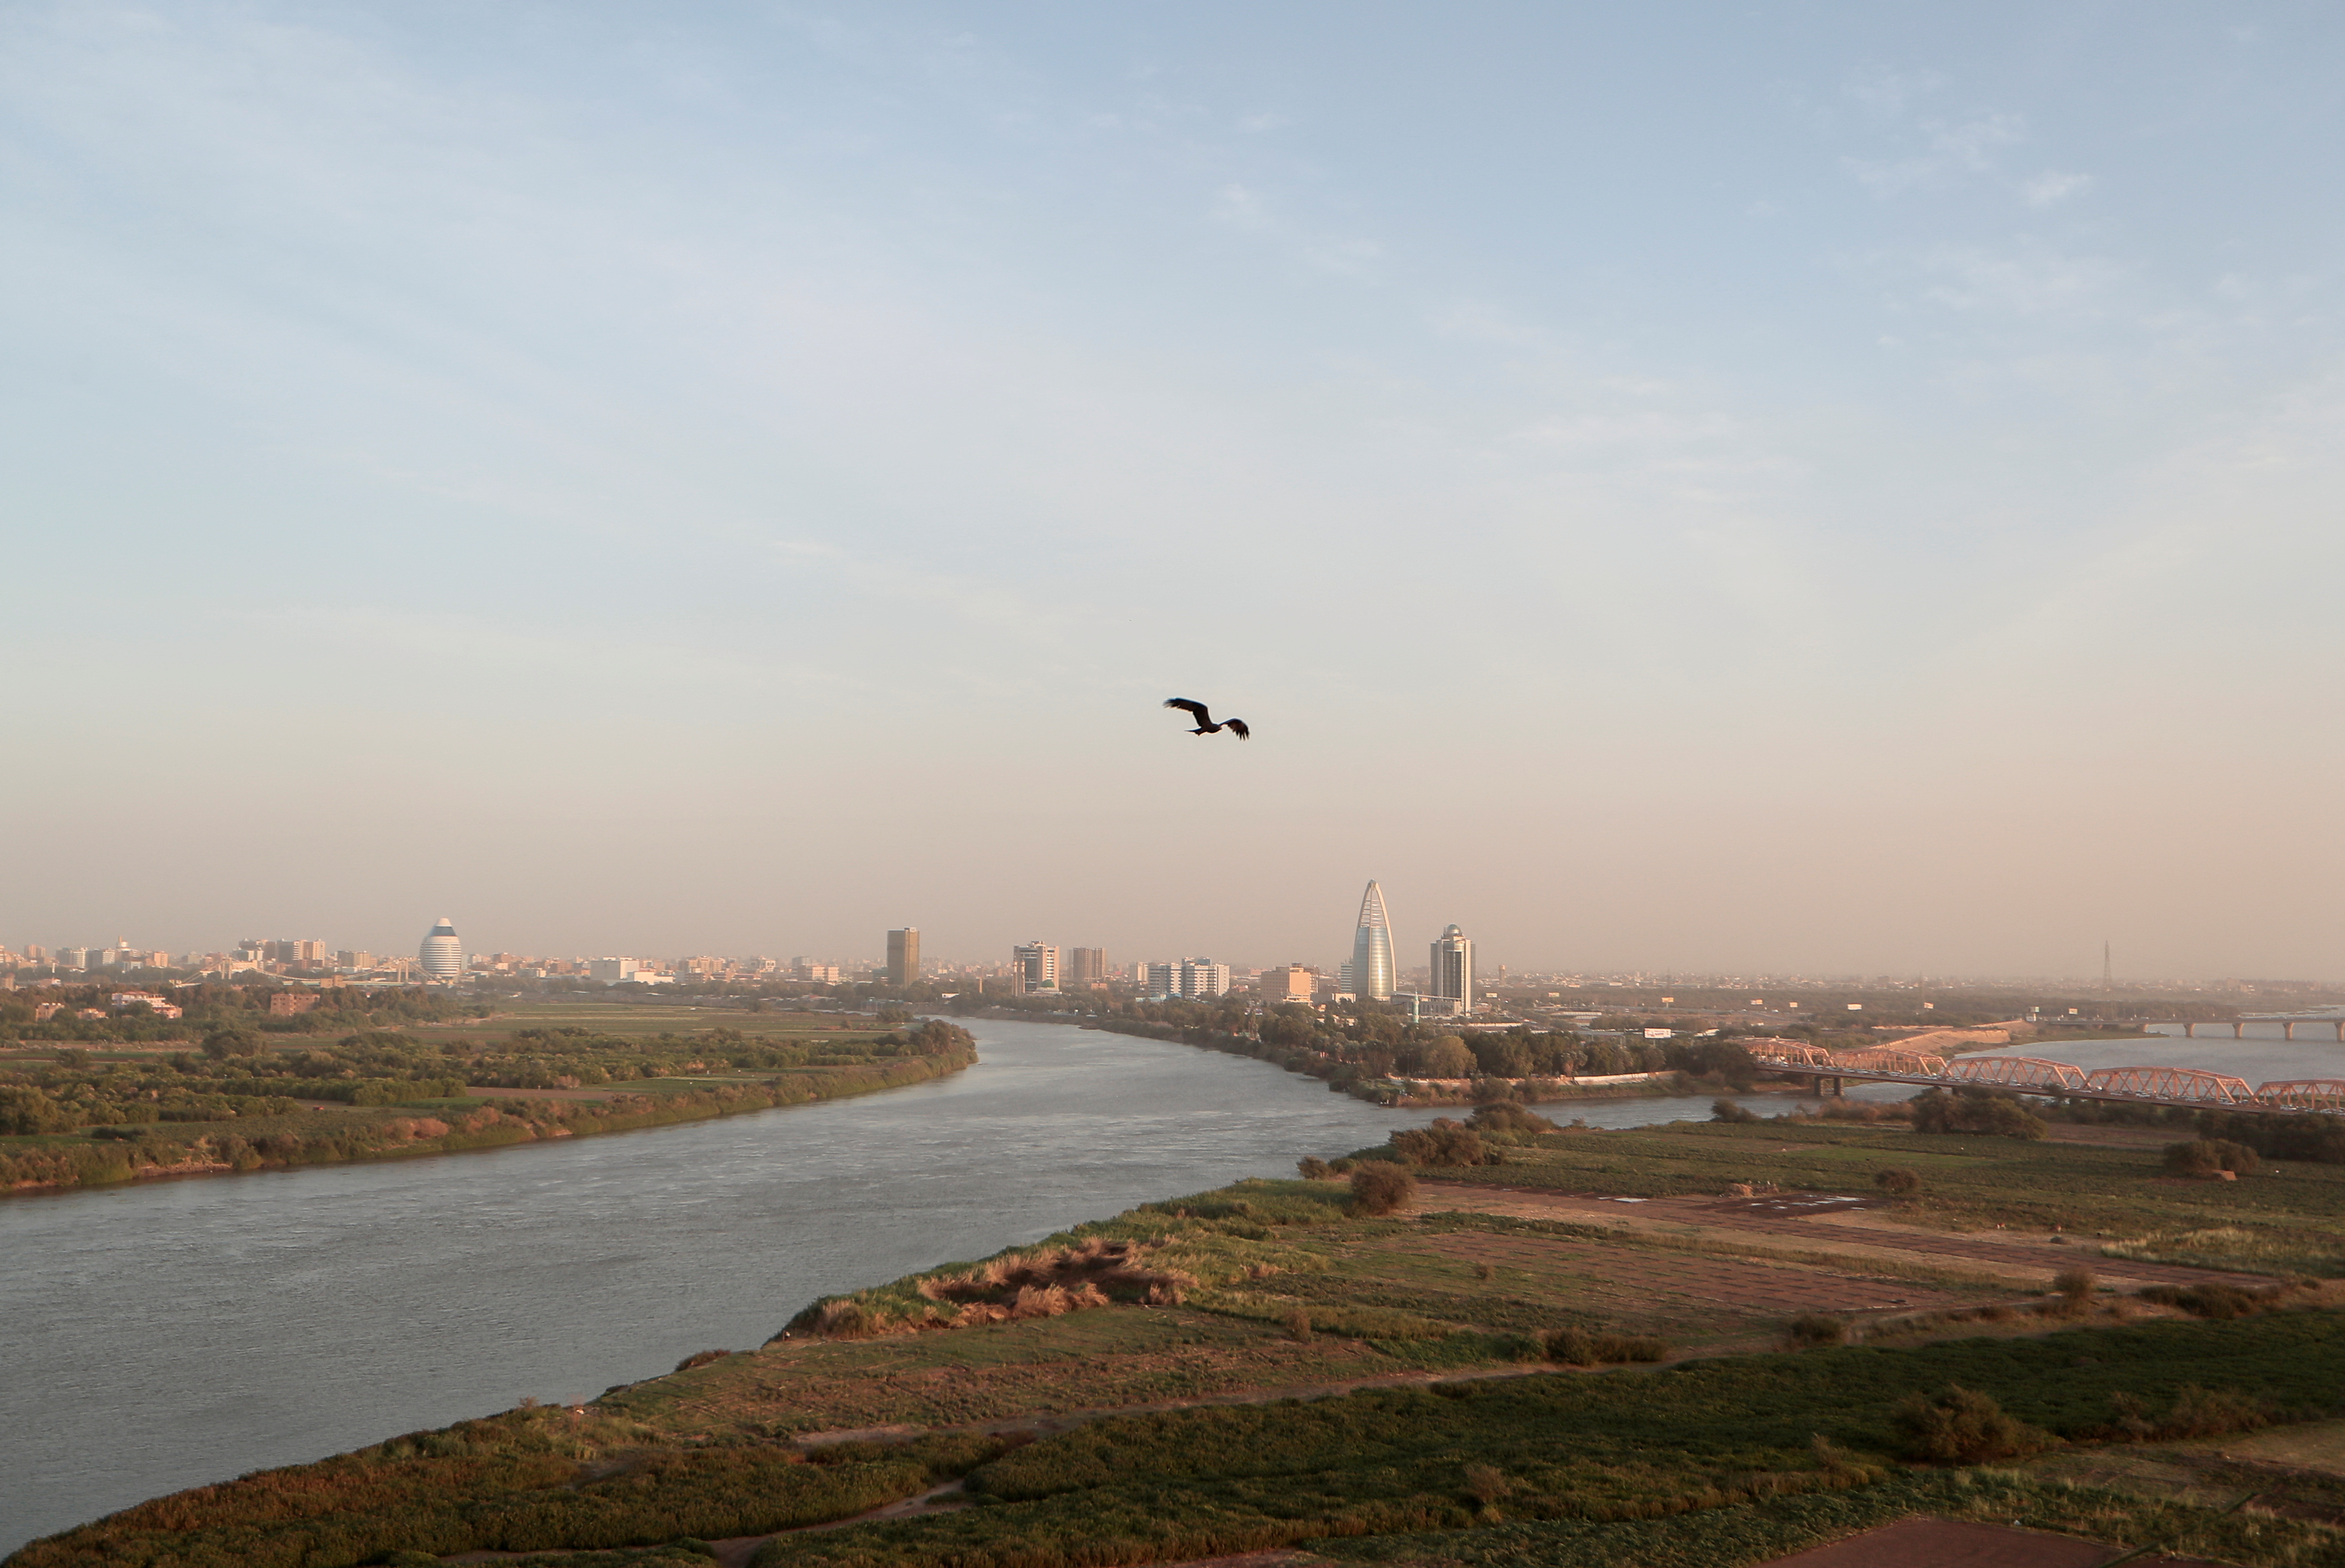 A bird flies over the convergence between the White Nile river and Blue Nile river in Khartoum, Sudan